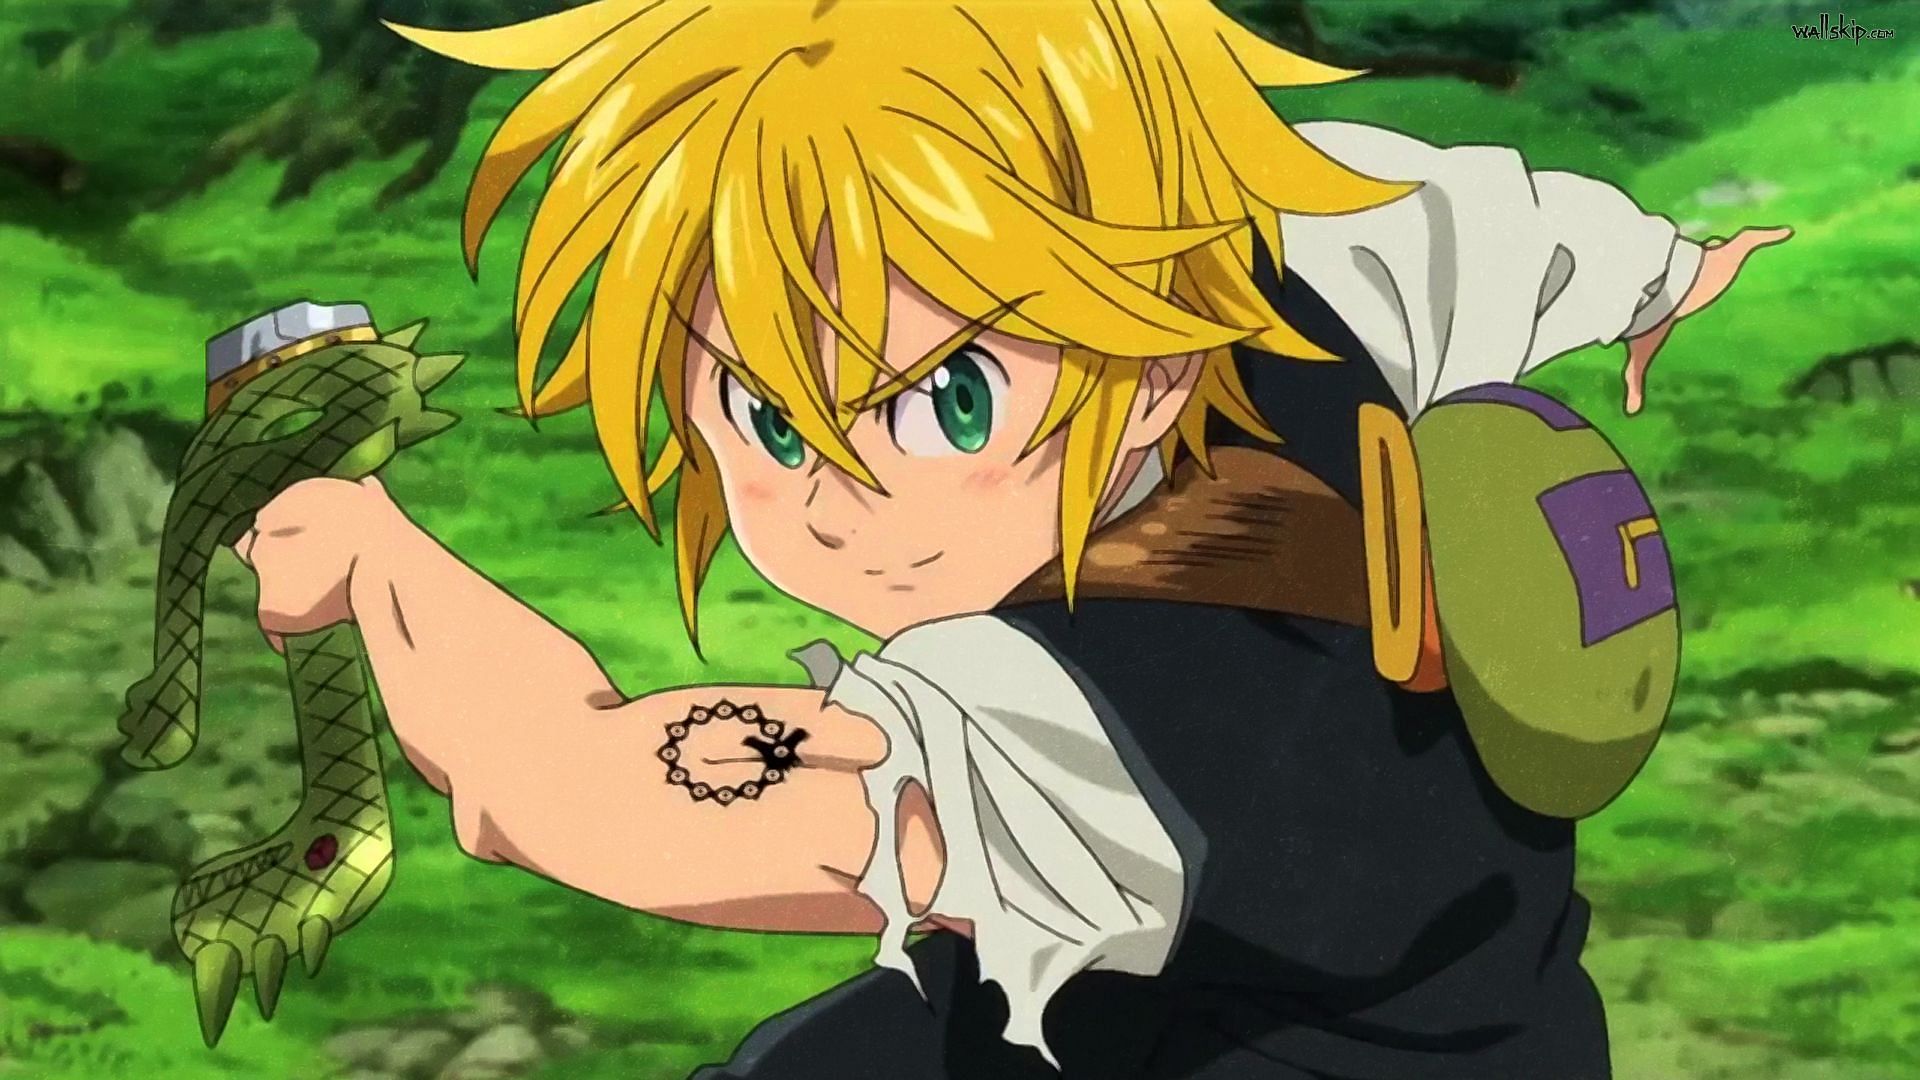 Meliodas is more than 3000 years old. (image via A-1 Pictures)